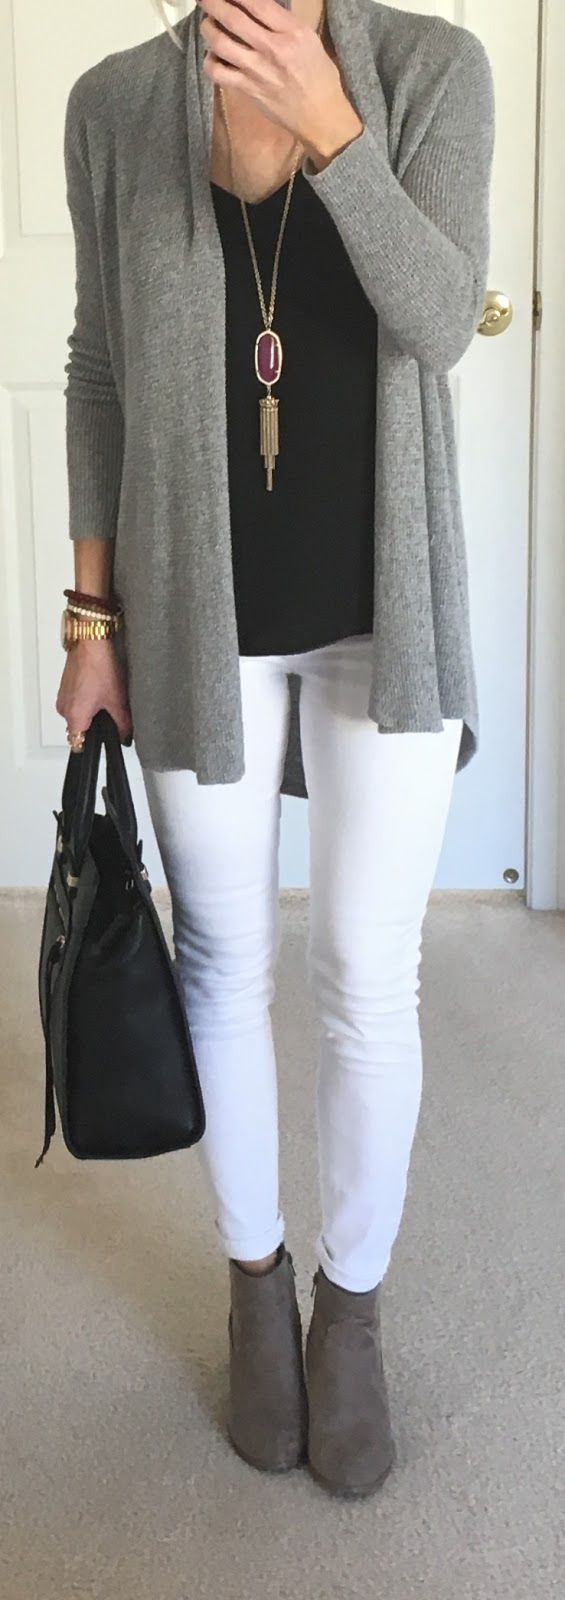 40 Best Cardigan Outfits Ideas To Keep Warm In Style